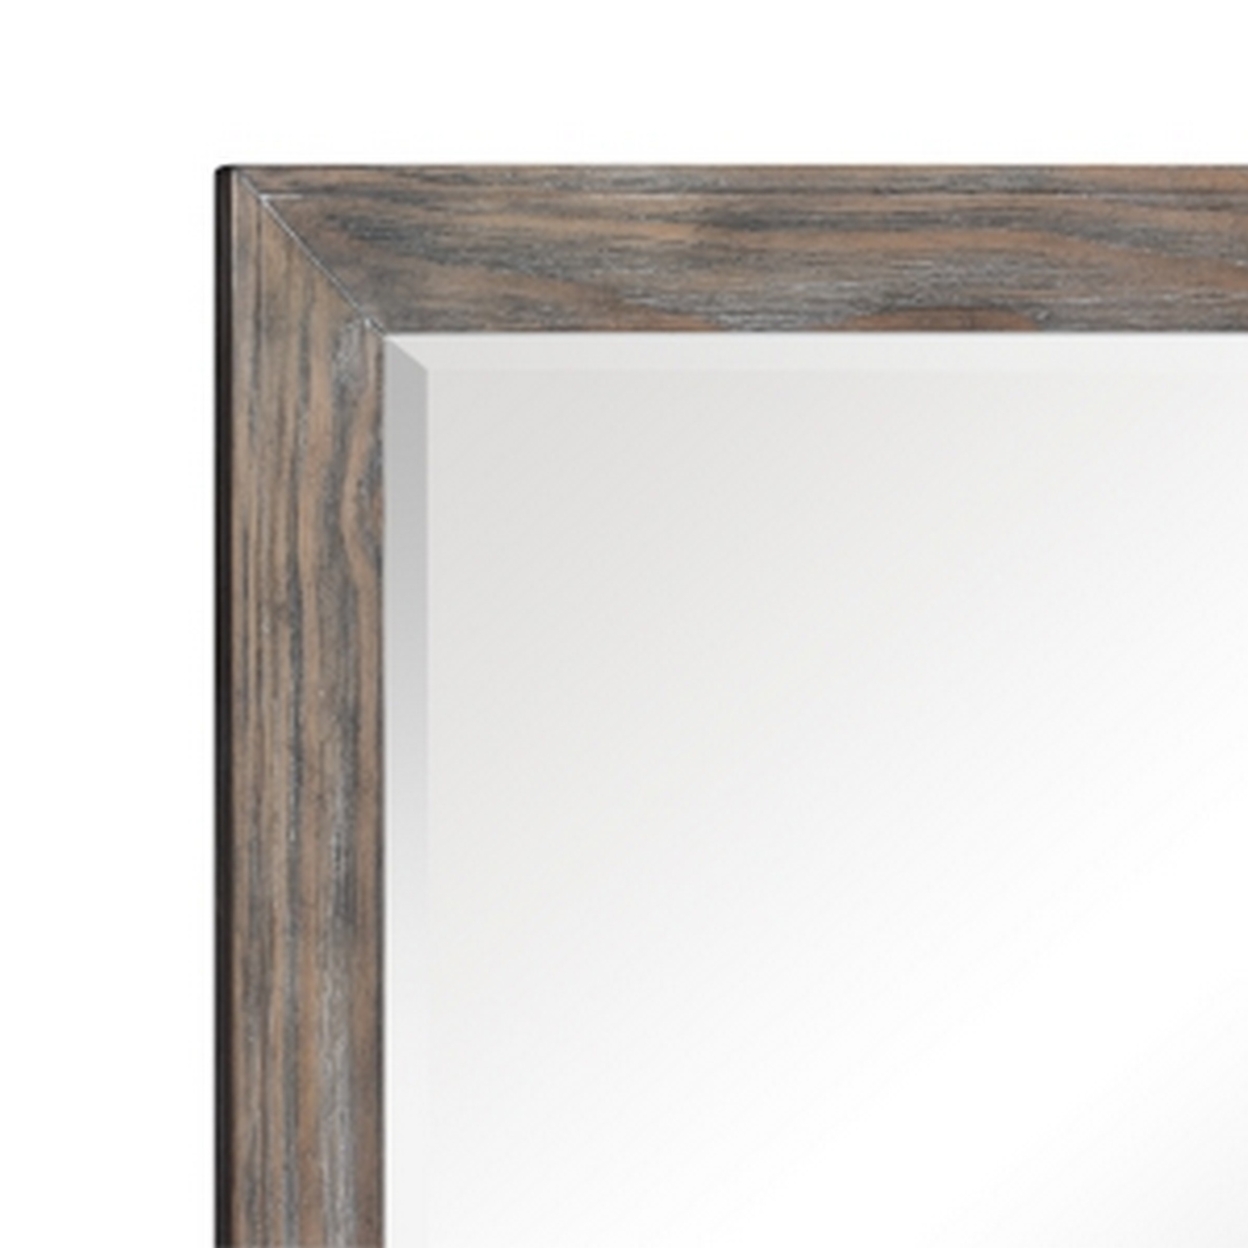 Cady 50 Inch Classic Accent Mirror, Recessed Picture Frame Molding, Gray- Saltoro Sherpi